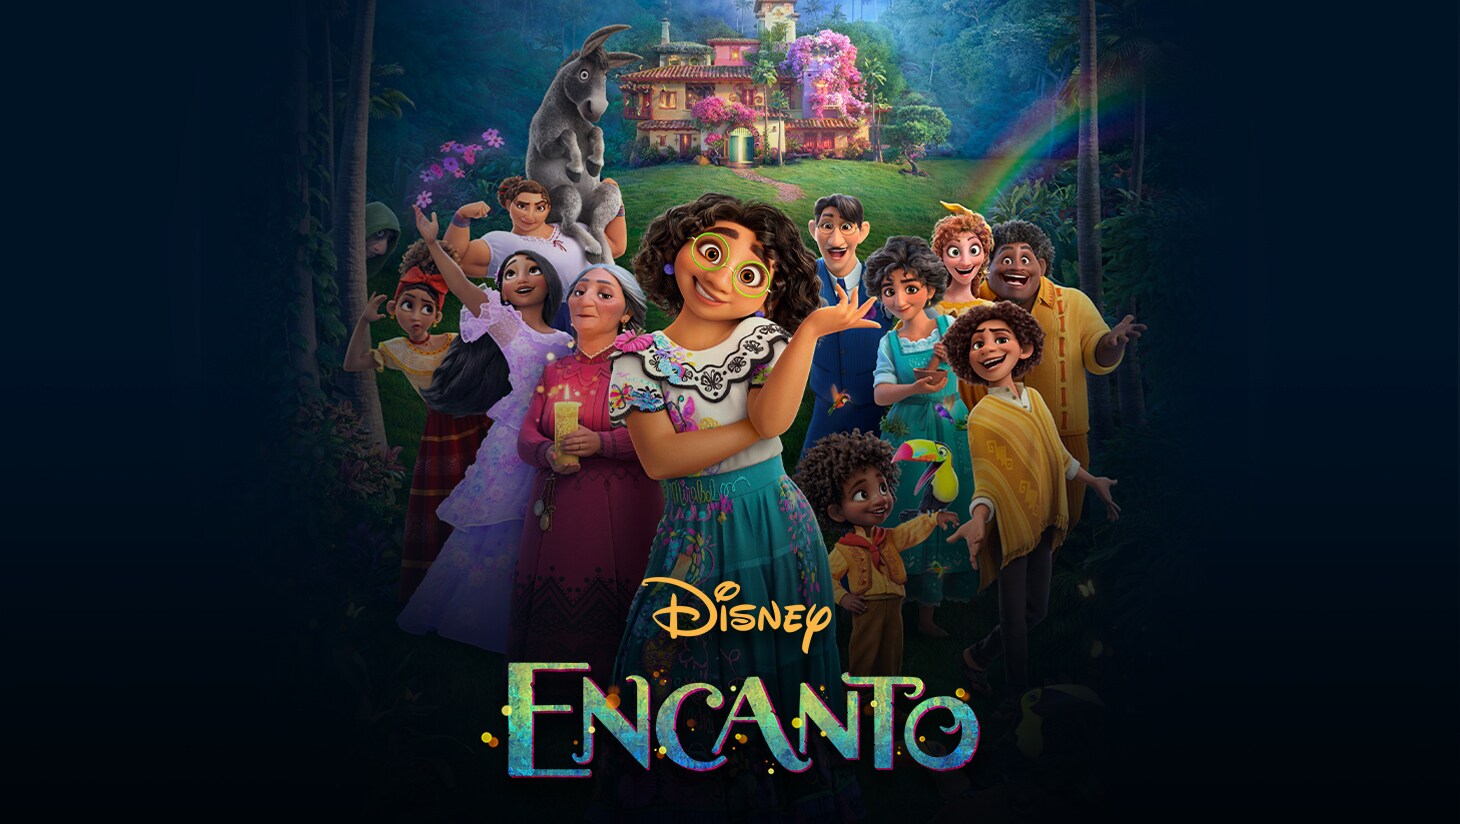 Encanto keyart featuring Mirabel and the rest of the Madrigal family